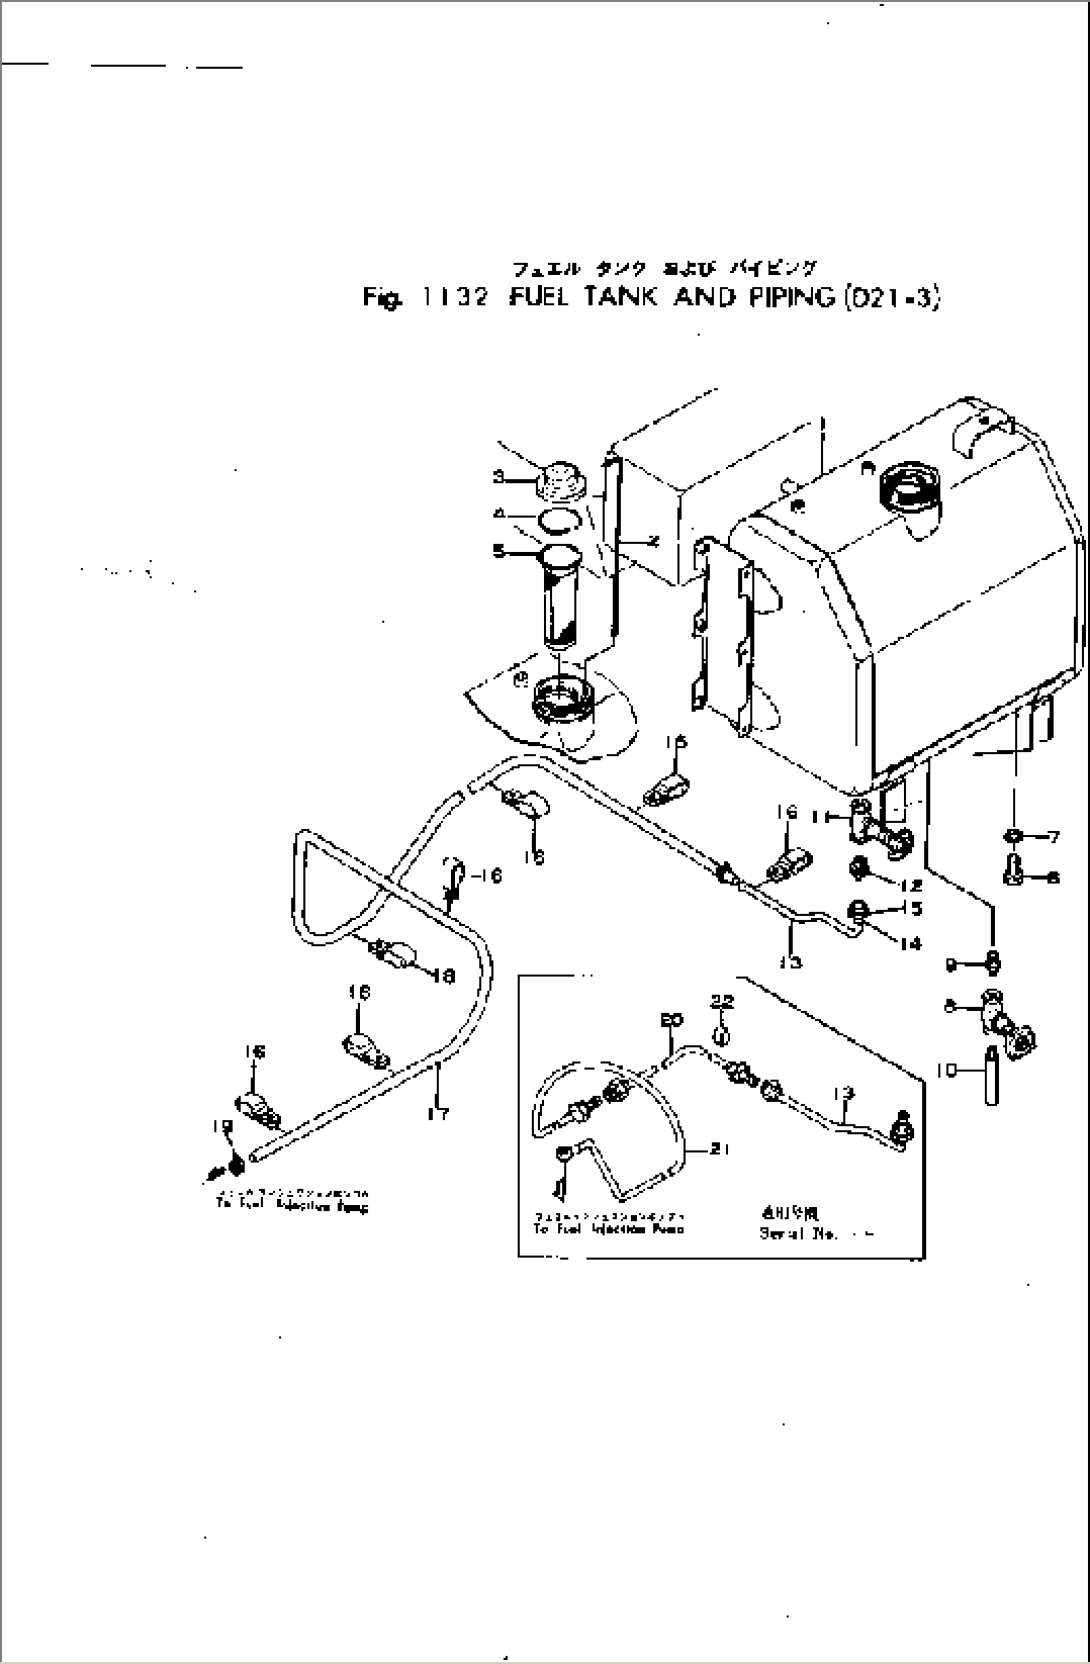 FUEL TANK AND PIPING